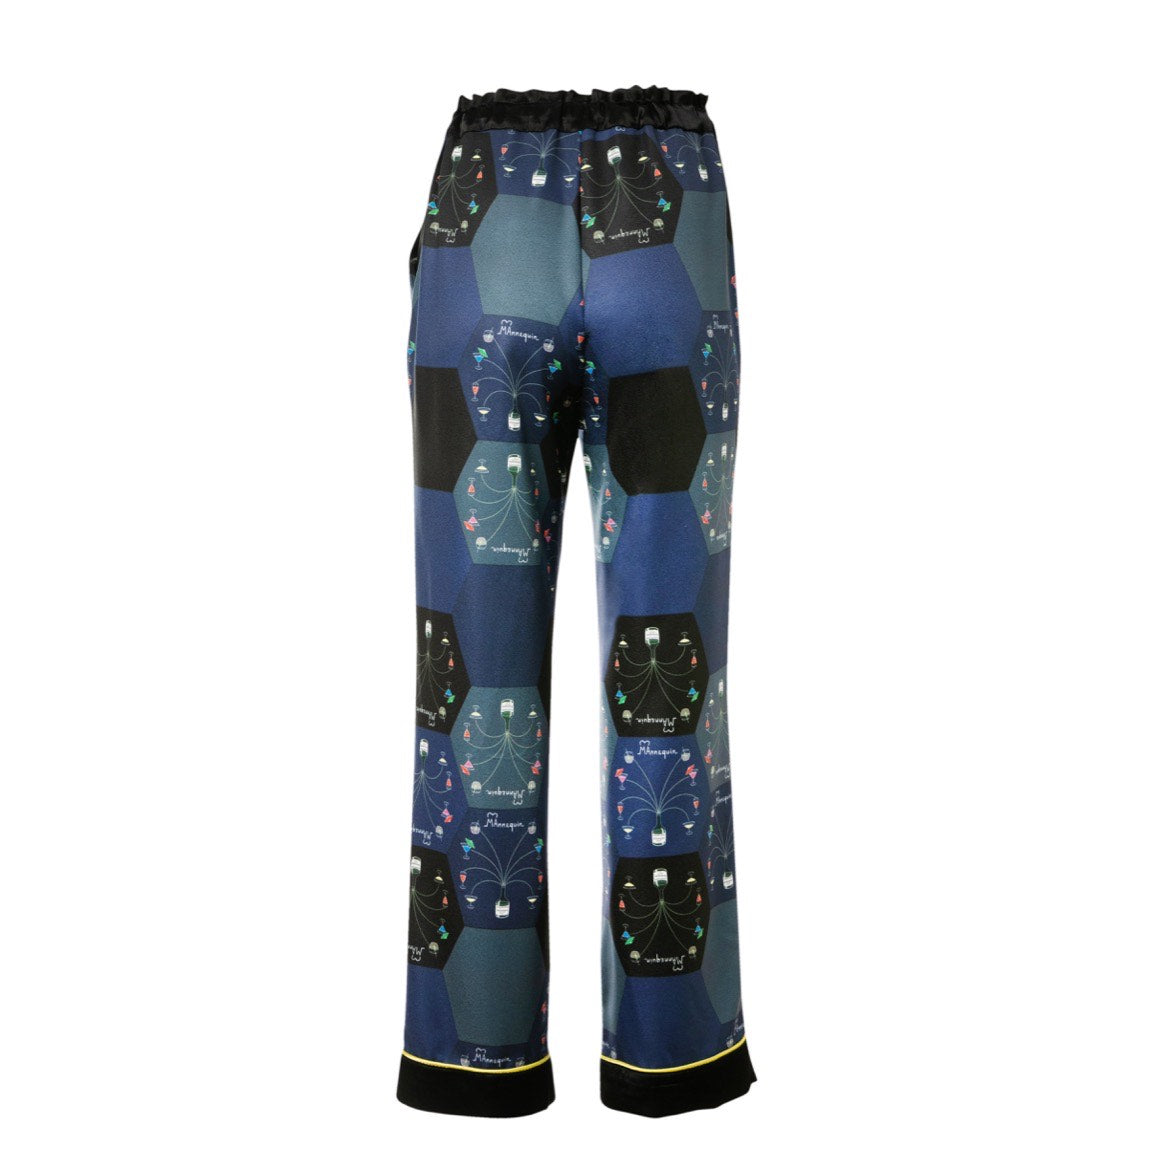 Milly Pants - Loose Fit Printed Trousers with Tie Belt